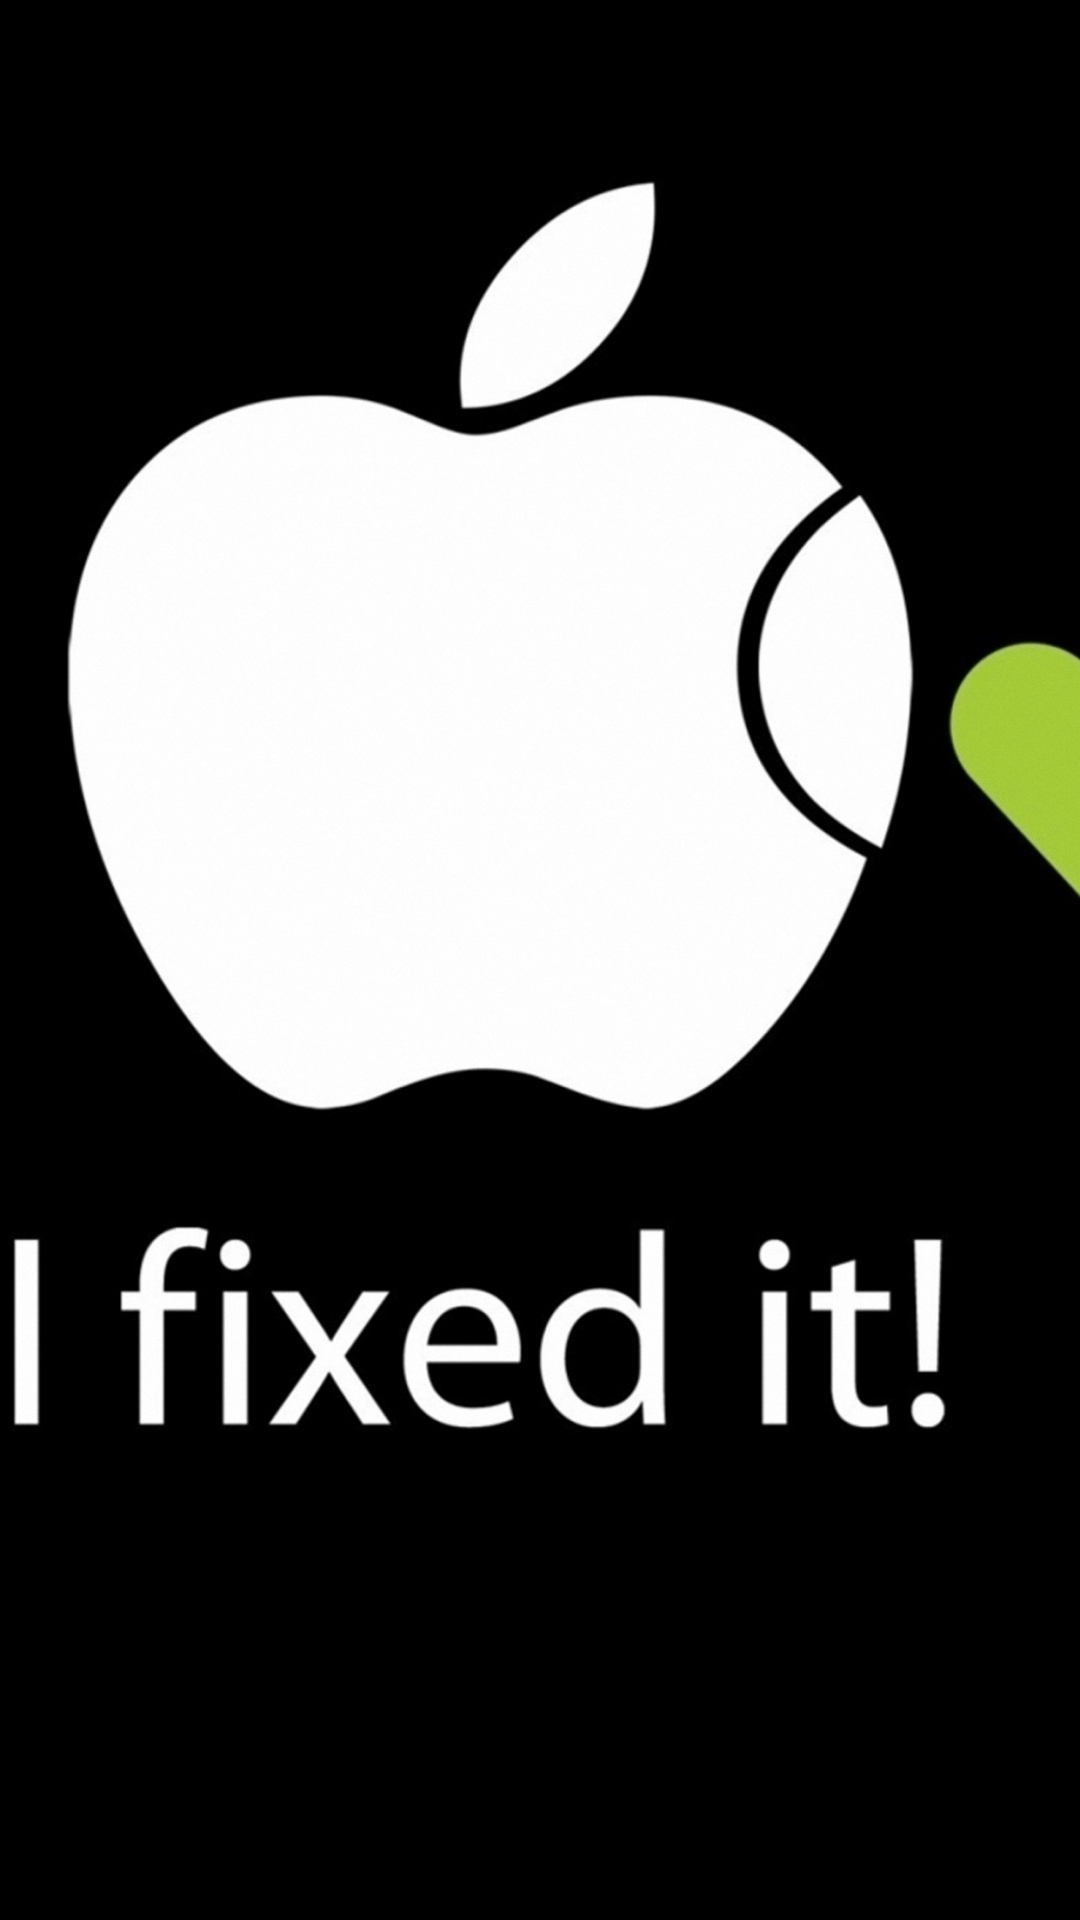 Android Fix Apple Iphone 6 Wallpapers Hd - Iphone Black Apple Wallpaper Hd - HD Wallpaper 